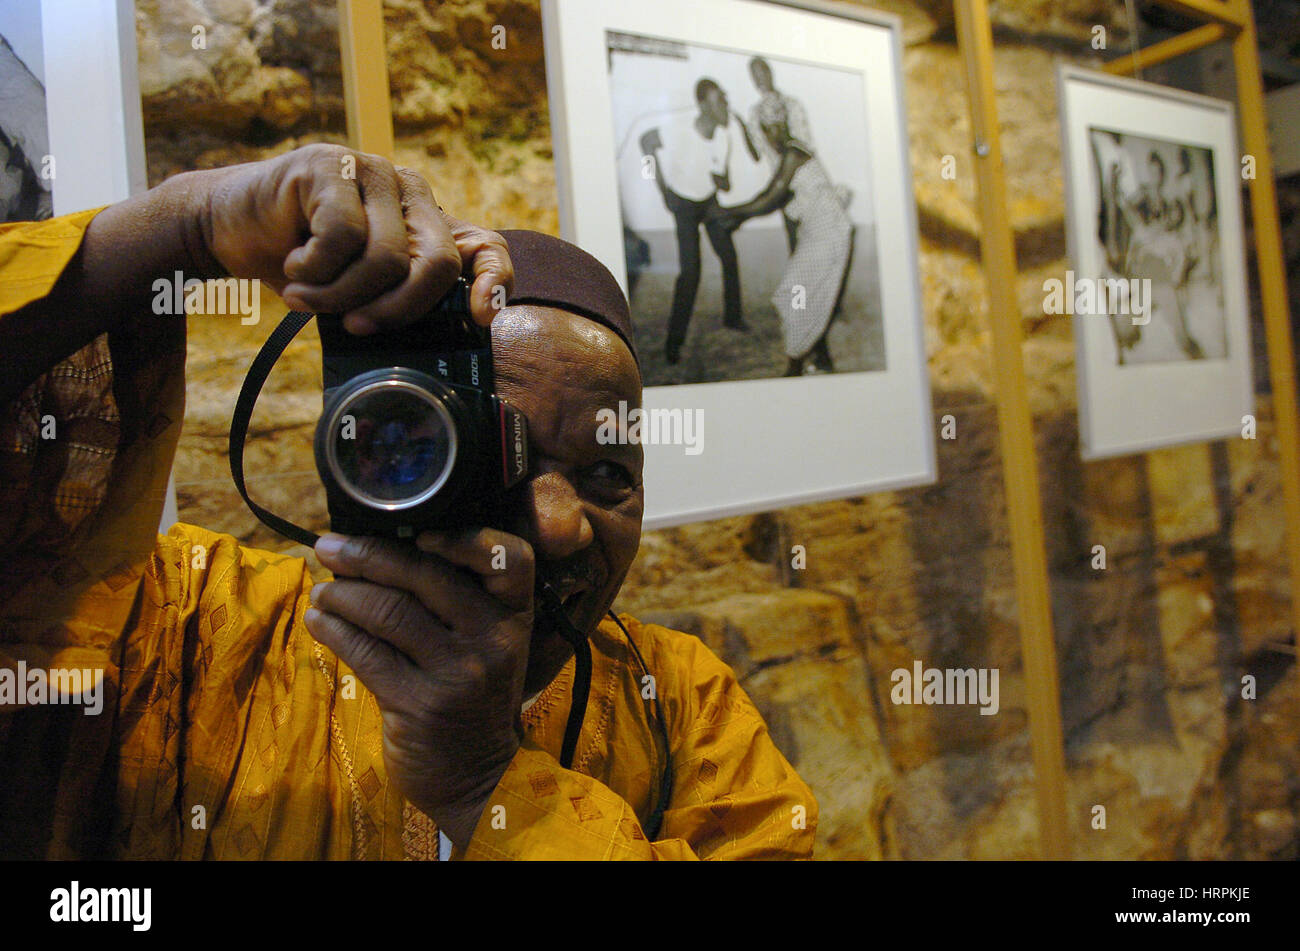 Luxembourg 09.11.2005. Photographe Malien Malick Sidibé posent devant son exposition in Luxembourg. Banque D'Images